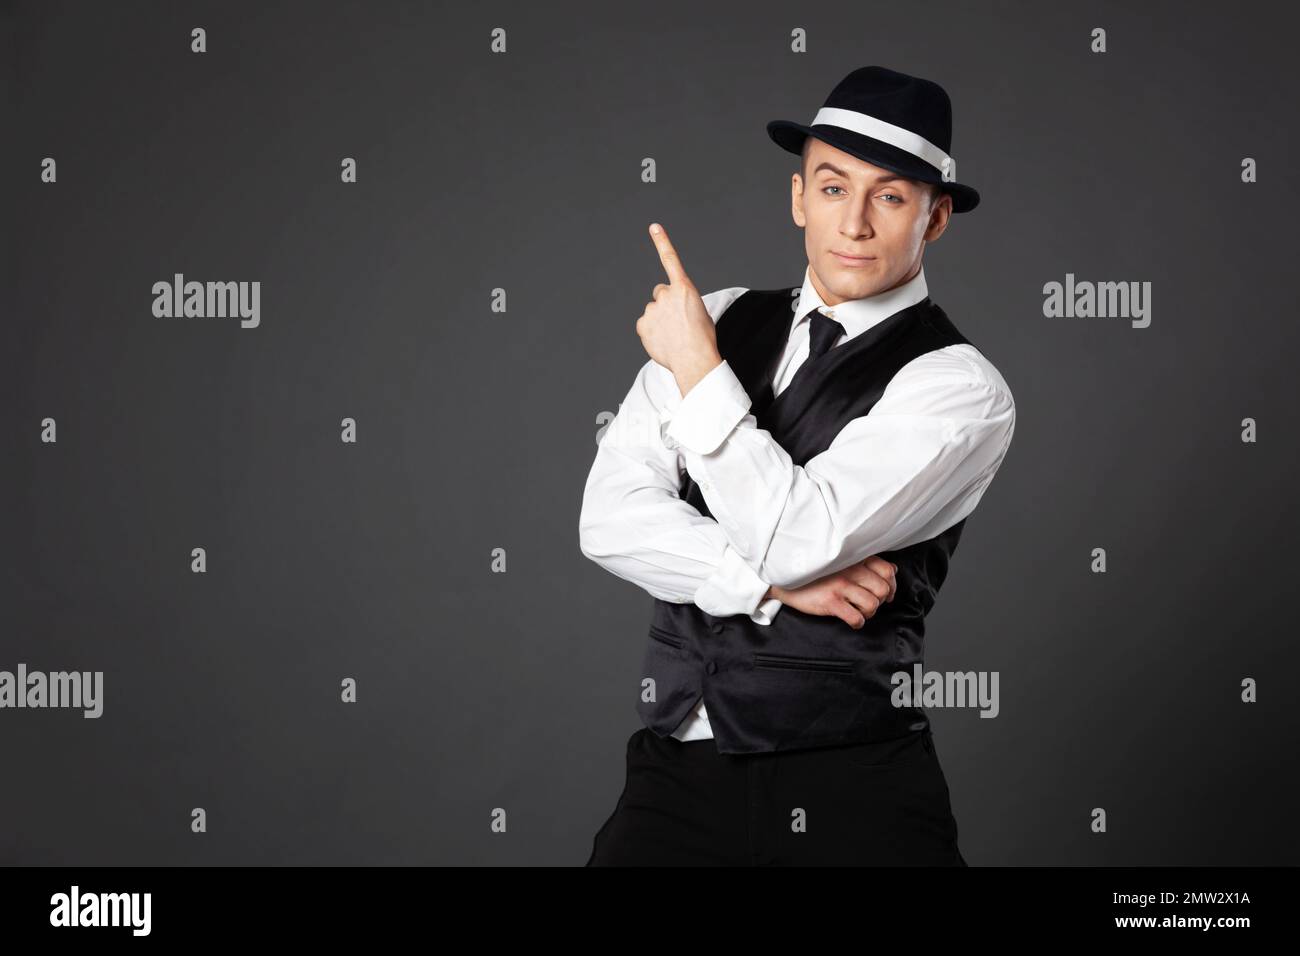 Men's Beauty, Fashion. Retro Style. Handsome Man In An Expensive  Three-piece Suit, A Cap And Leather Gloves On A Black Background. Mafia  Man. Stock Photo, Picture and Royalty Free Image. Image 158258662.